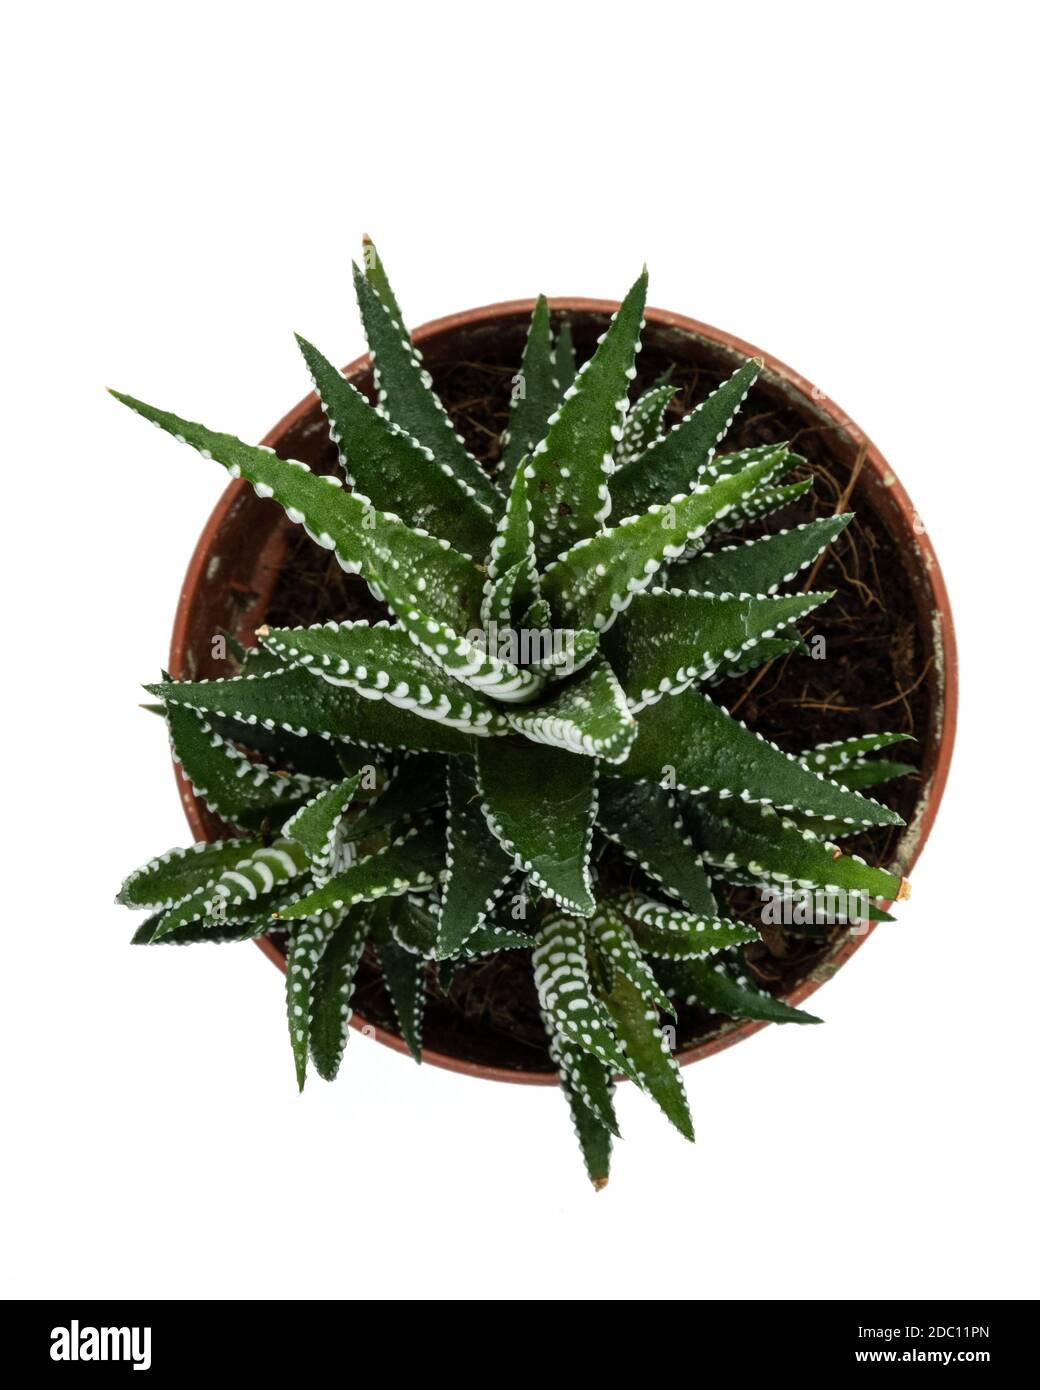 Top view of a Zebra plant (Haworthia fasciata), in a pot and on a white background. Stock Photo